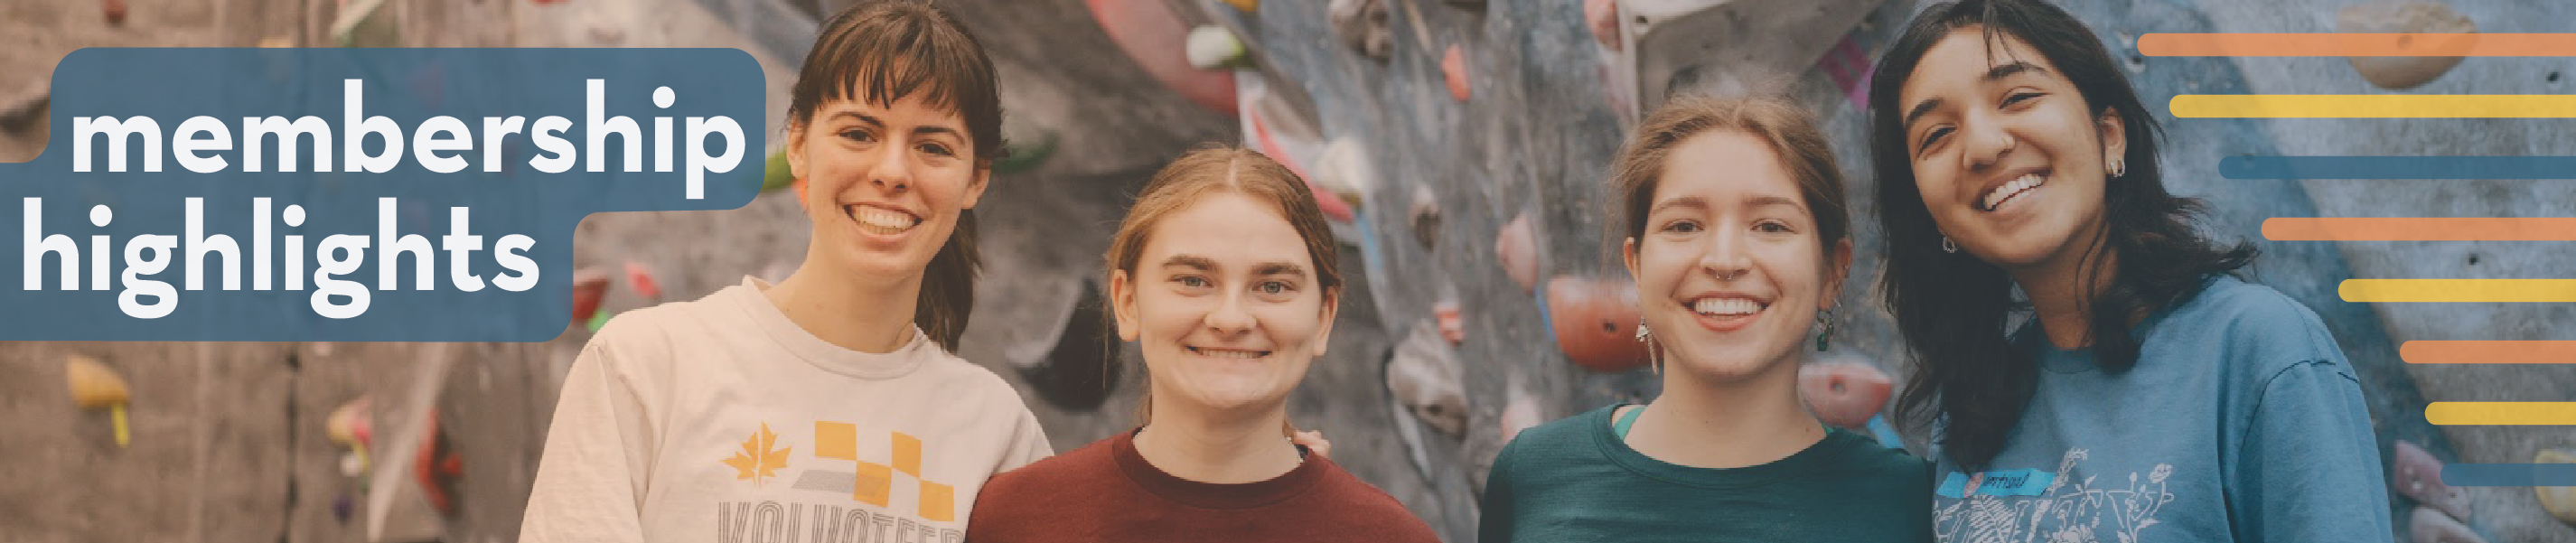 four smiling students standing in front of rock climbing wall with text "membership highlights"